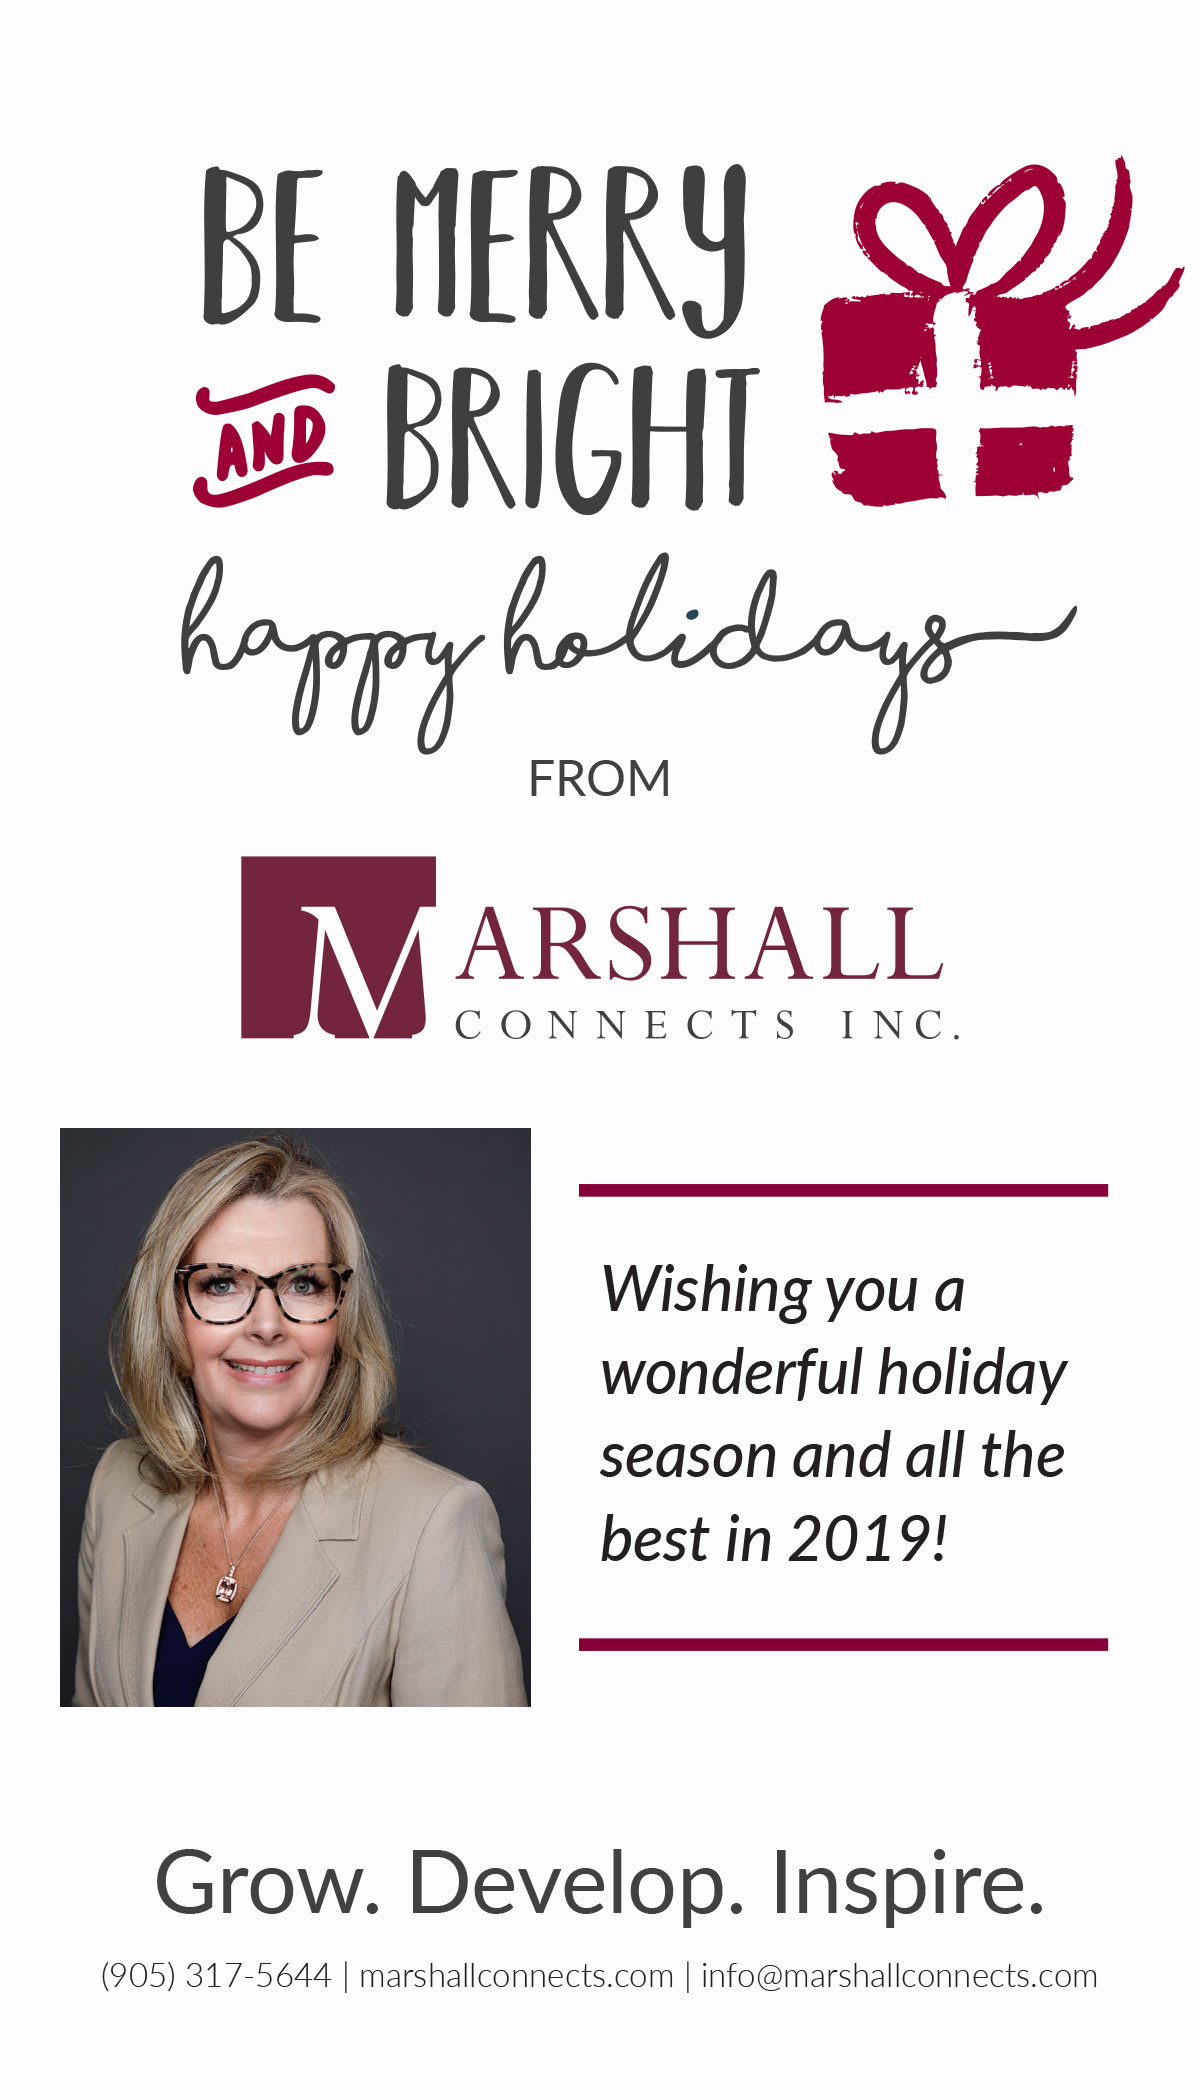 Season's Greetings From Marshall Connects